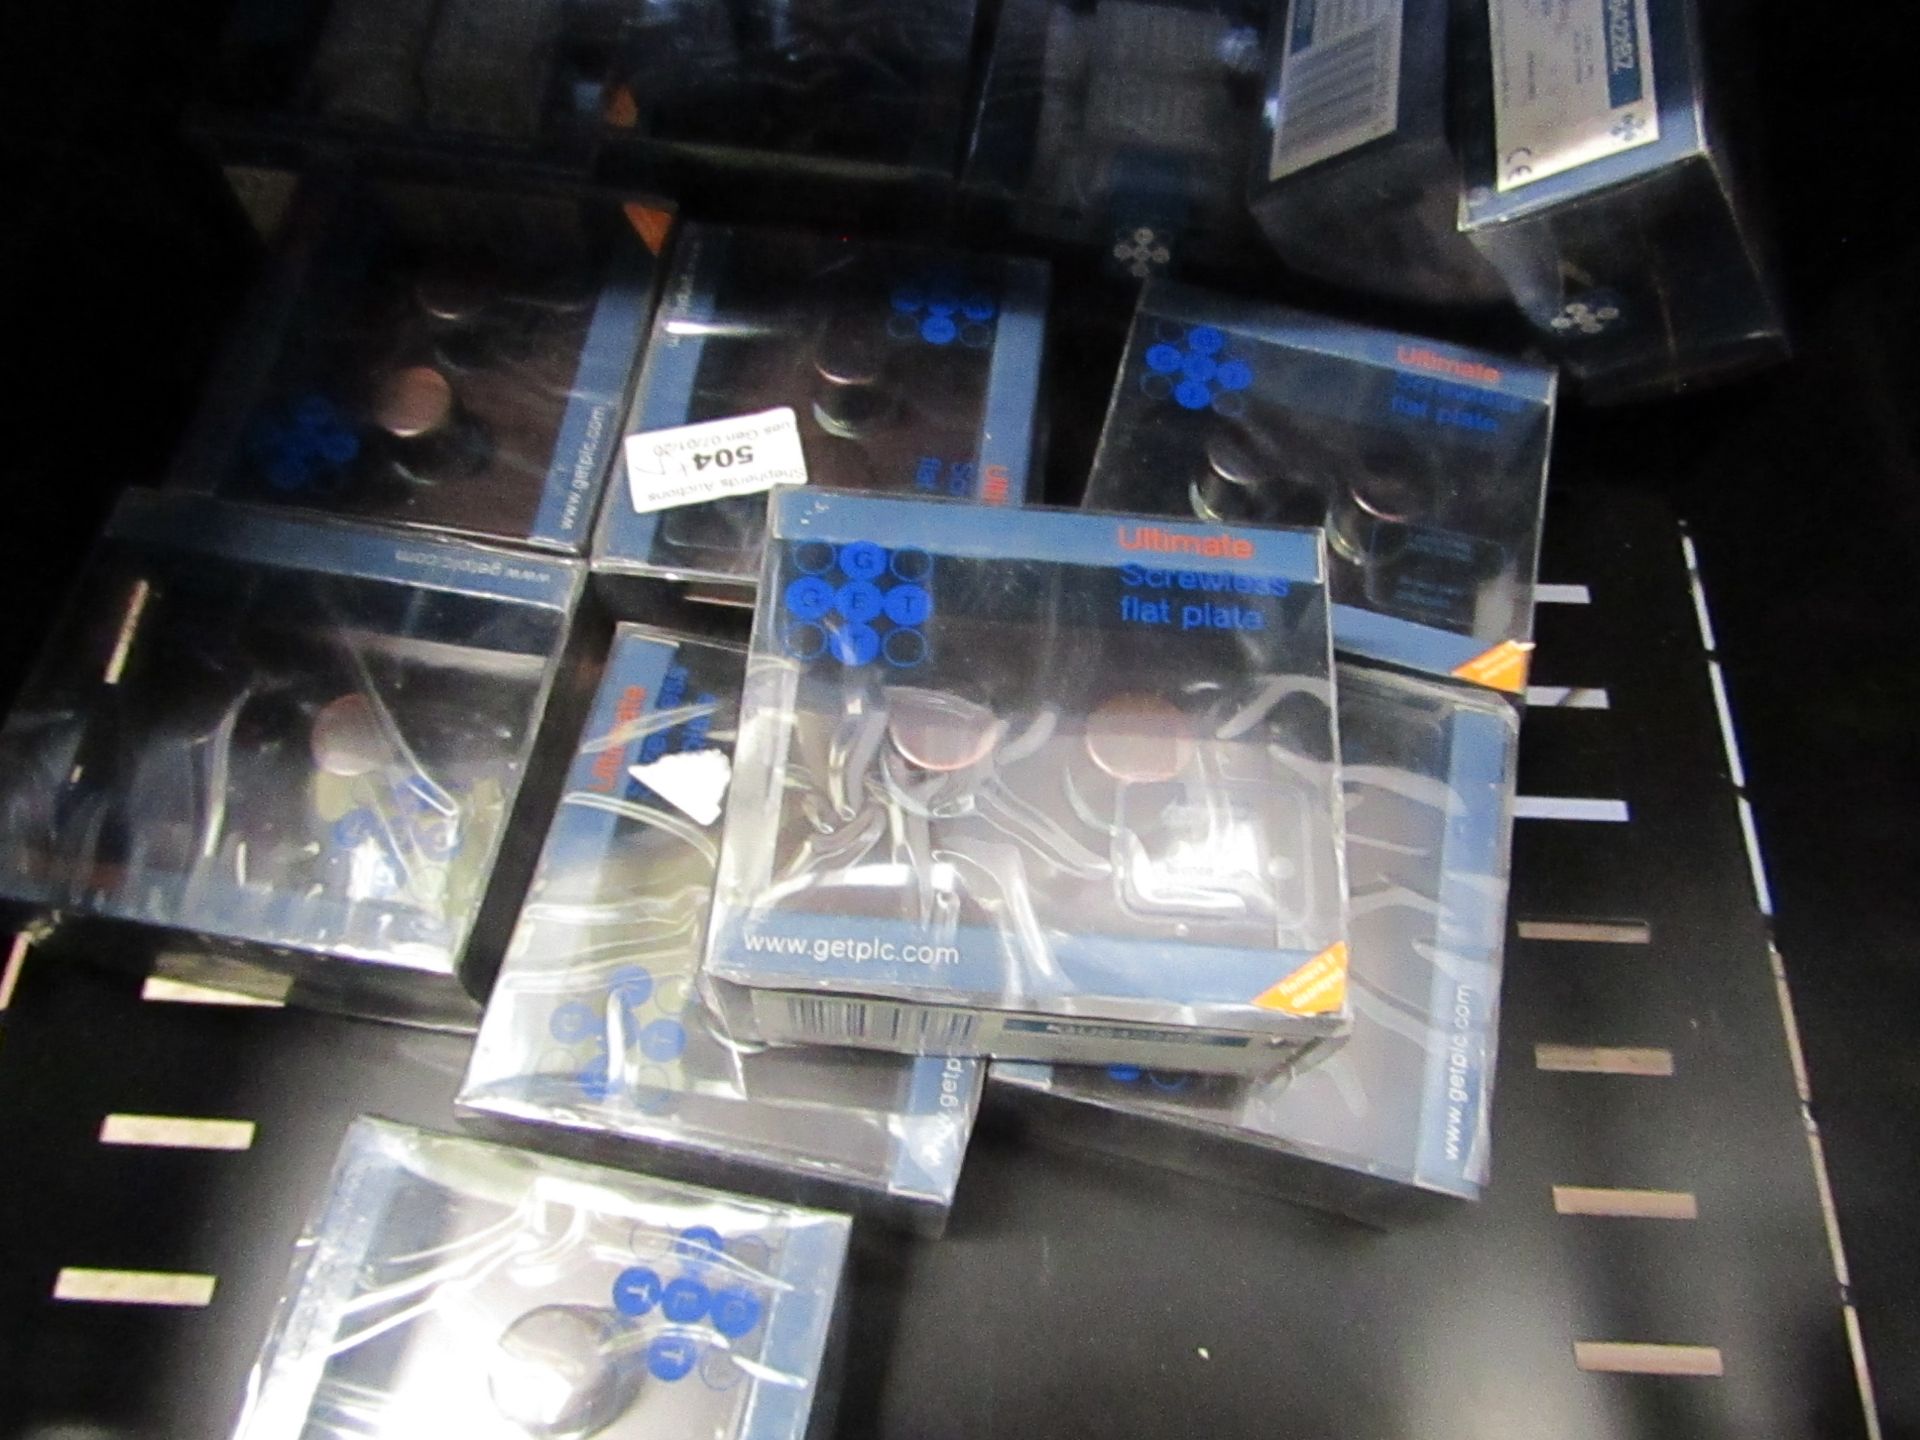 Approx 18x screwless flat plates, new and packaged.